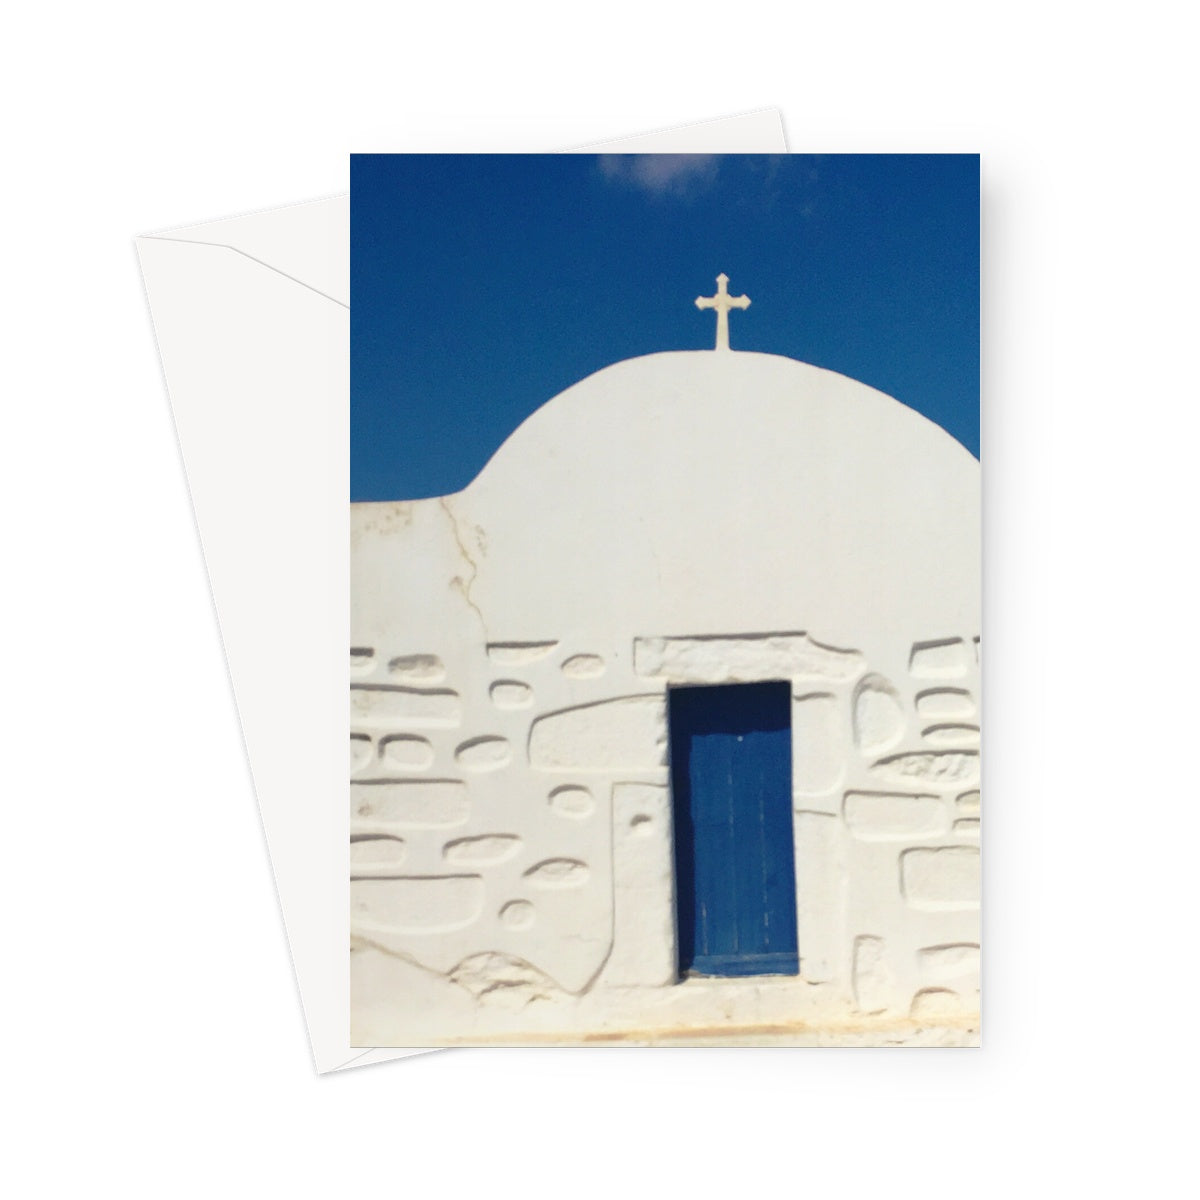 Greeting card showing a small whitewashed traditional Greek Orthodox church. The walls are carved in the traditional detail of the Greek islands. A blue entrance door matches the blue sky.